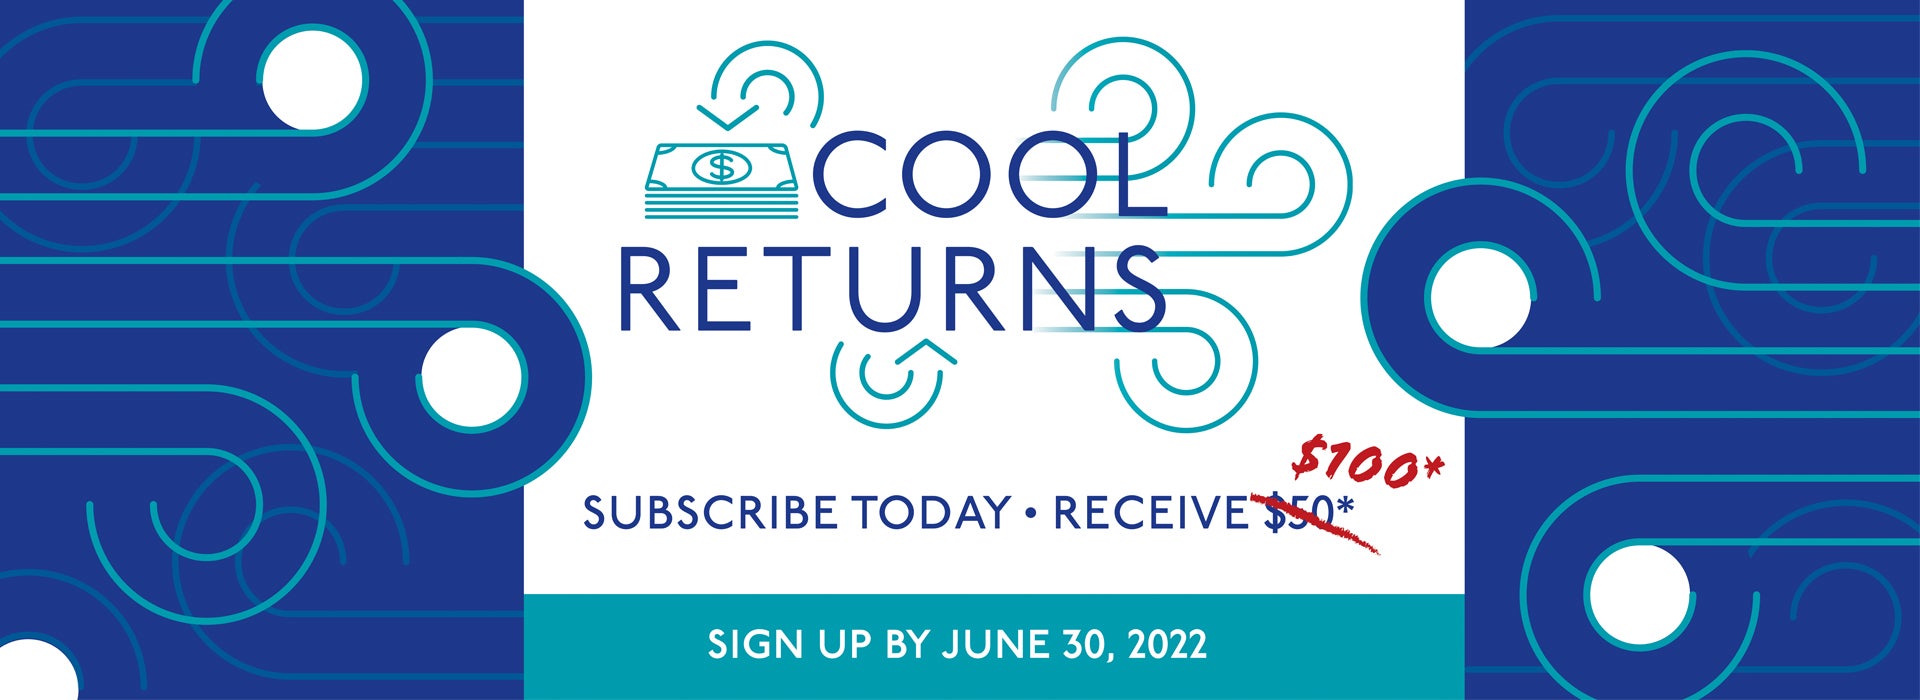 Get $100 by subscribing to Cool Returns